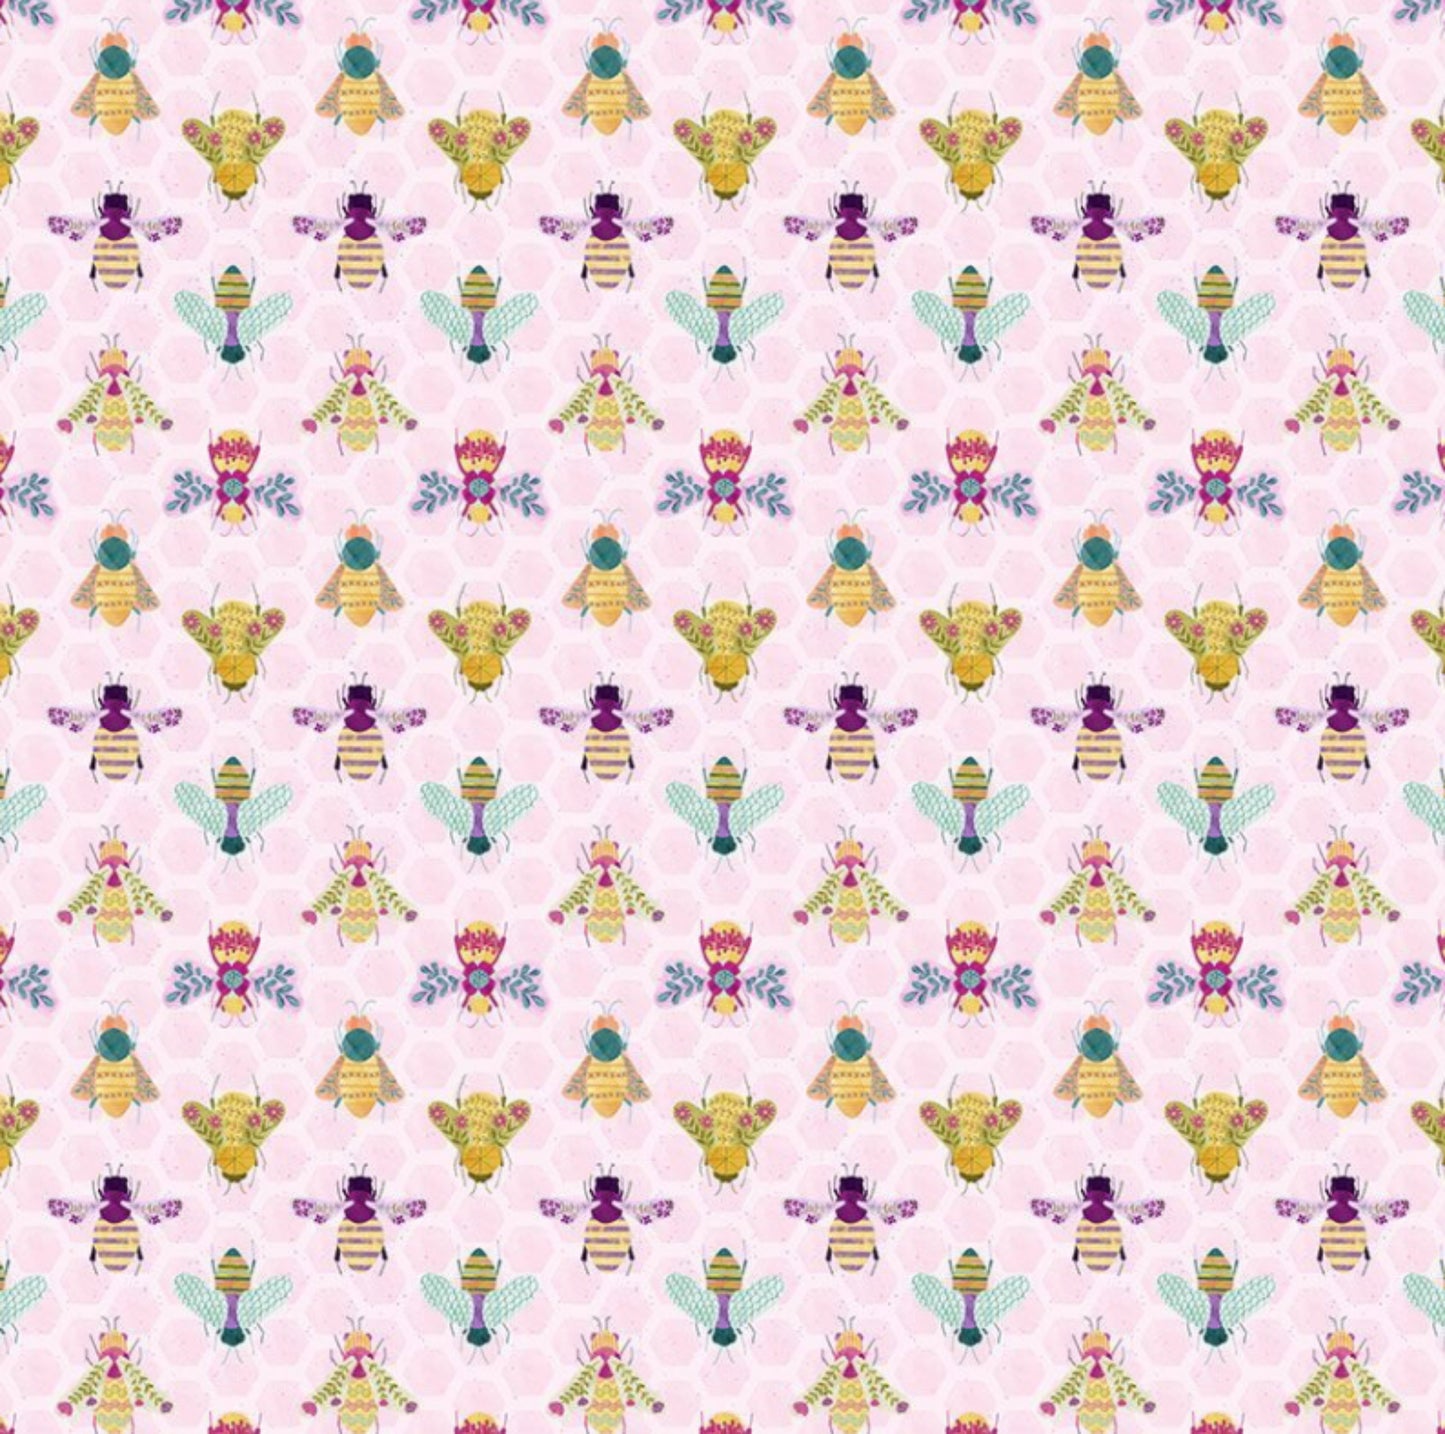 Bee curious Fabric from the CCurious Garden Collection by Pammie Jane for Dear Stella Fabrics. Light pink cotton fabric with assorted adorable bees.